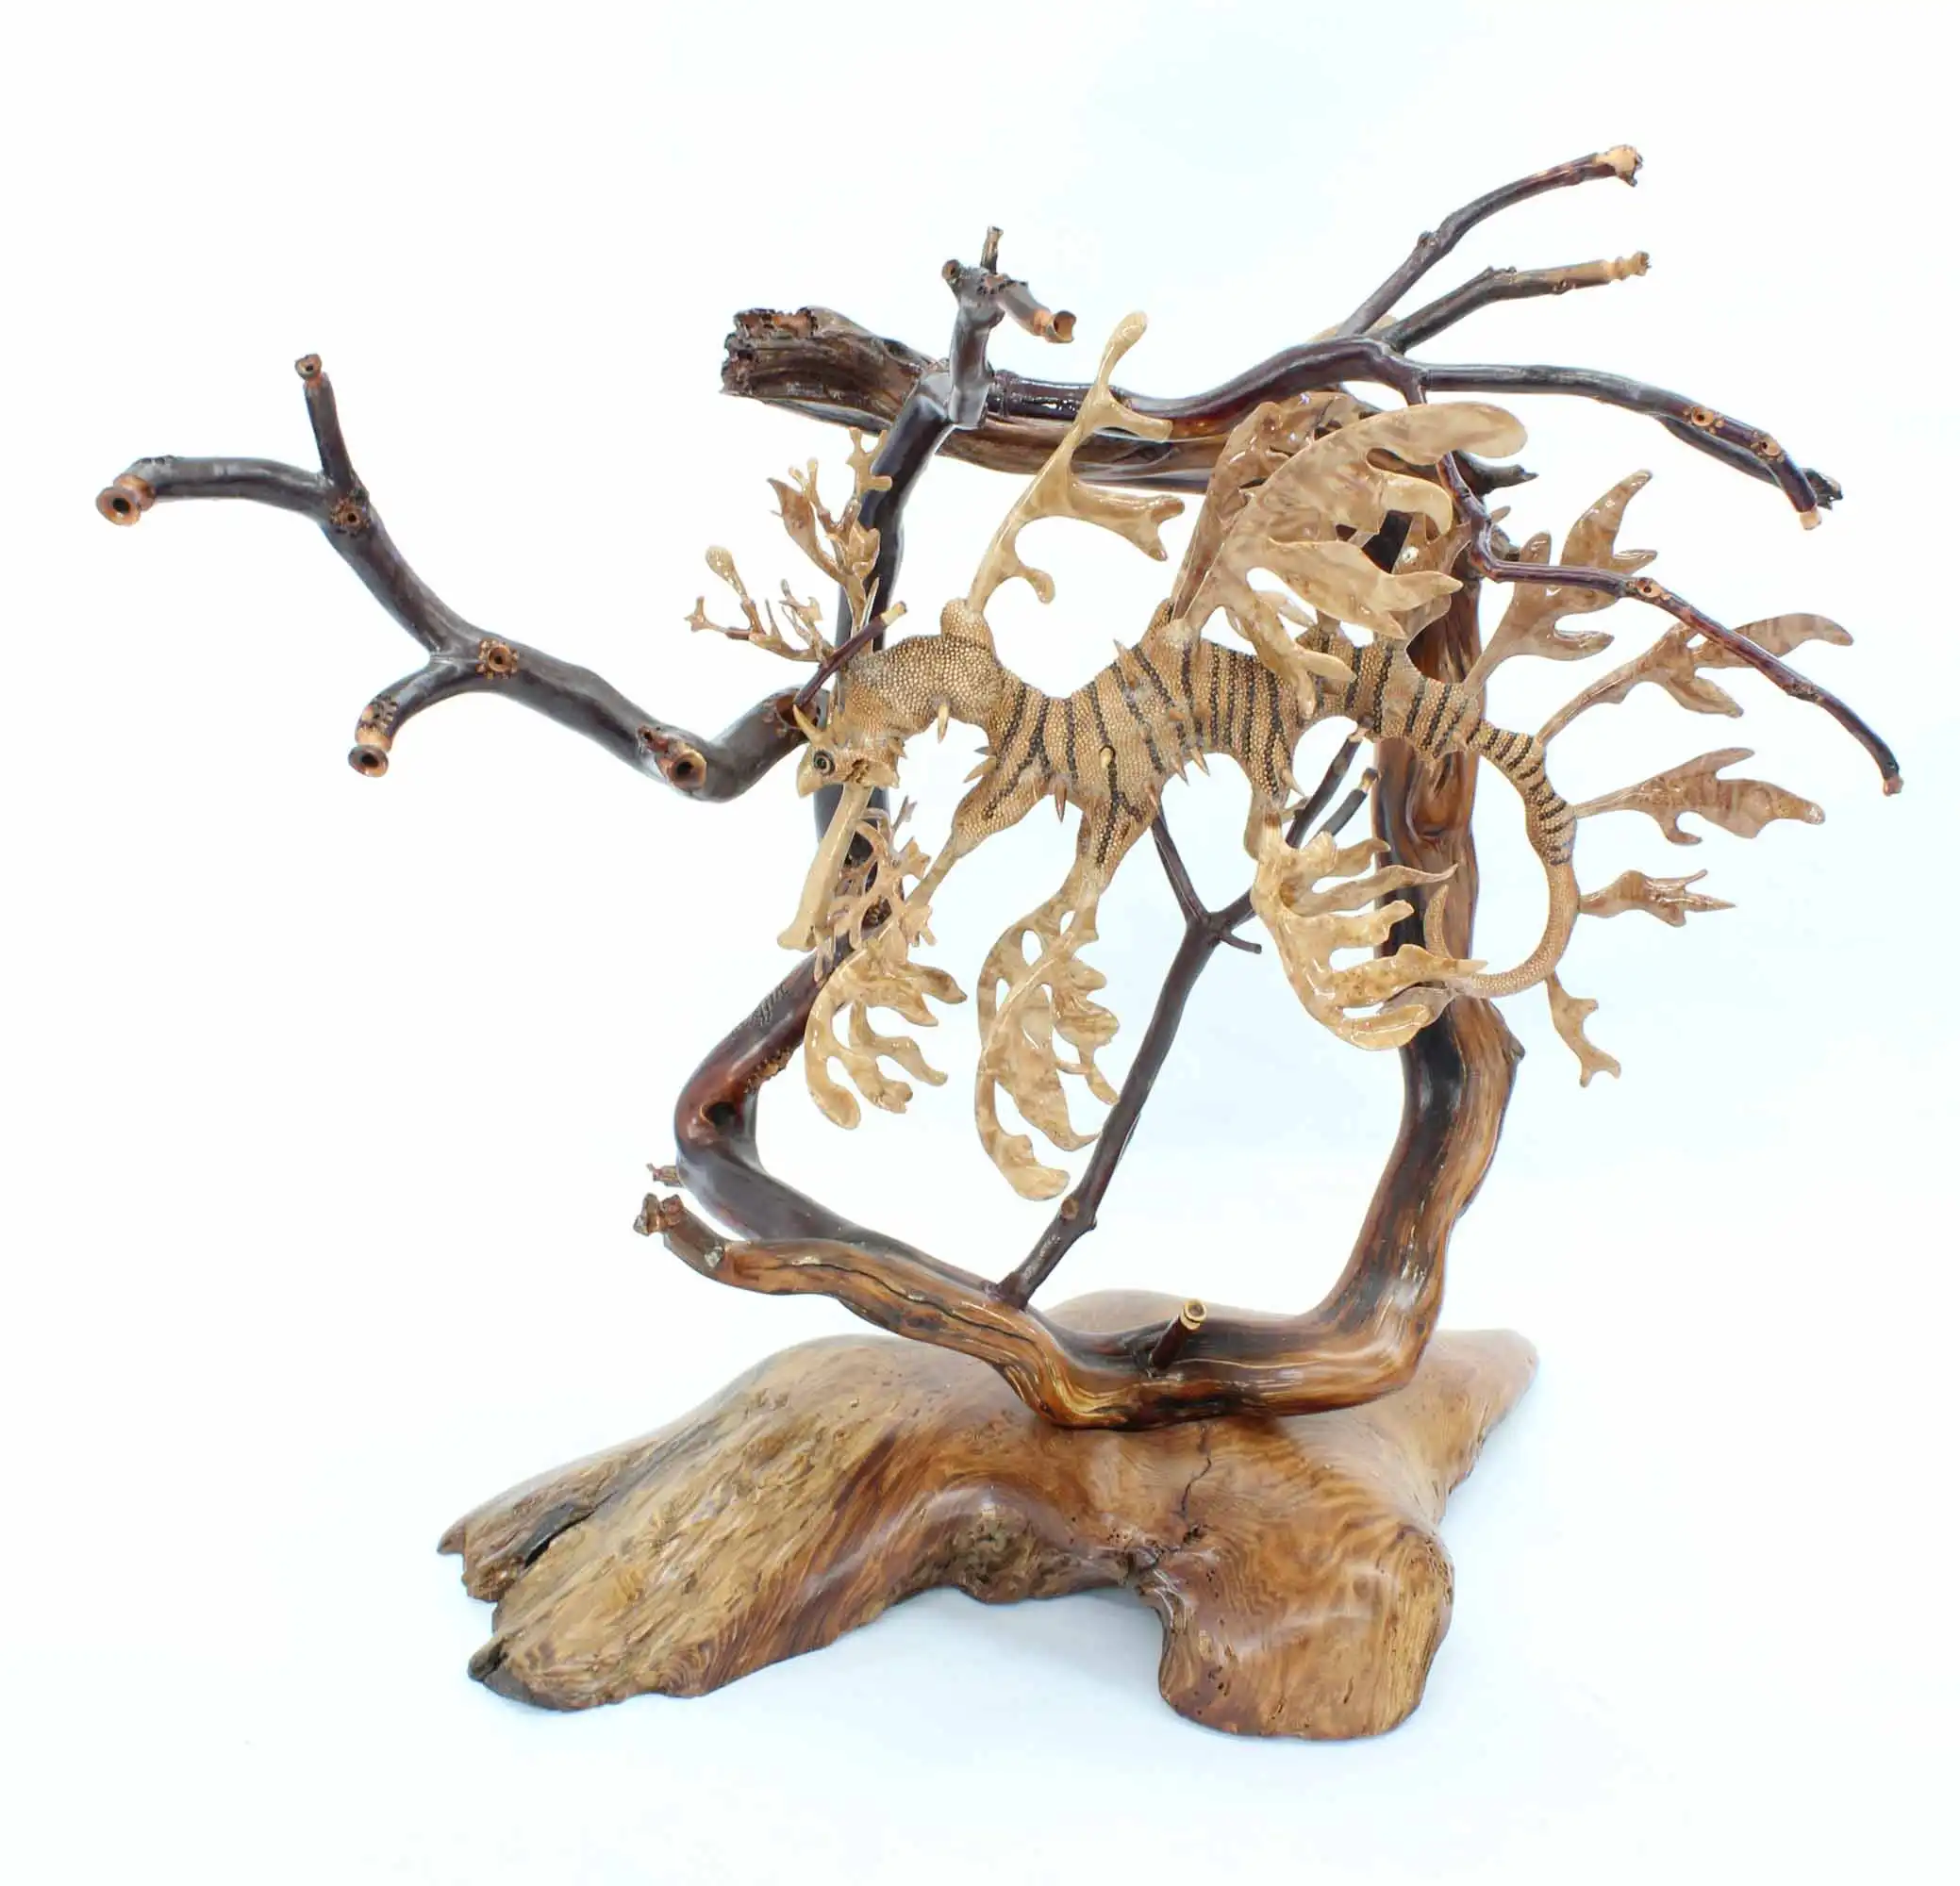 Leafy Sea Dragon woodcarving sculpture